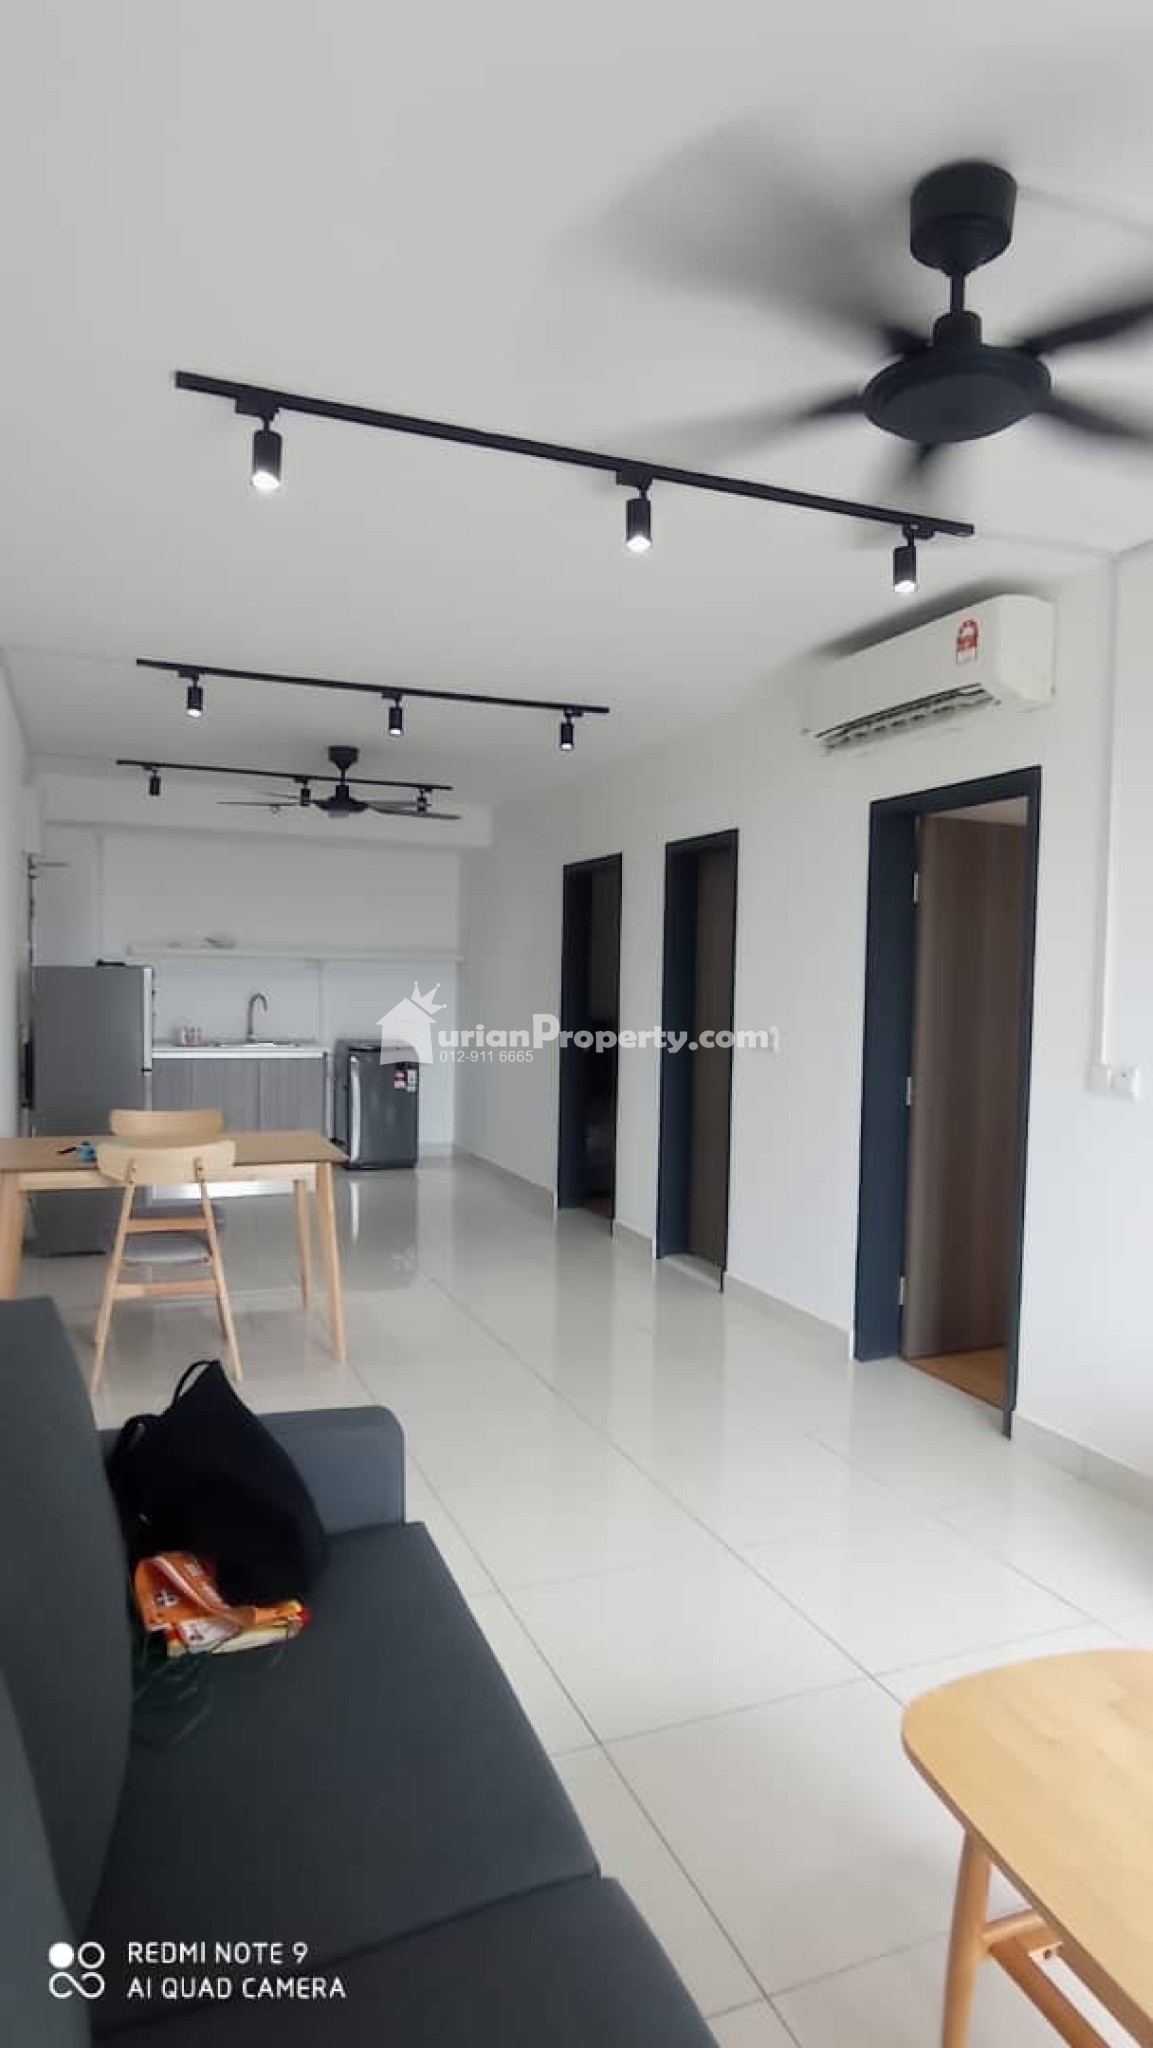 Serviced Residence For Rent at Edumetro